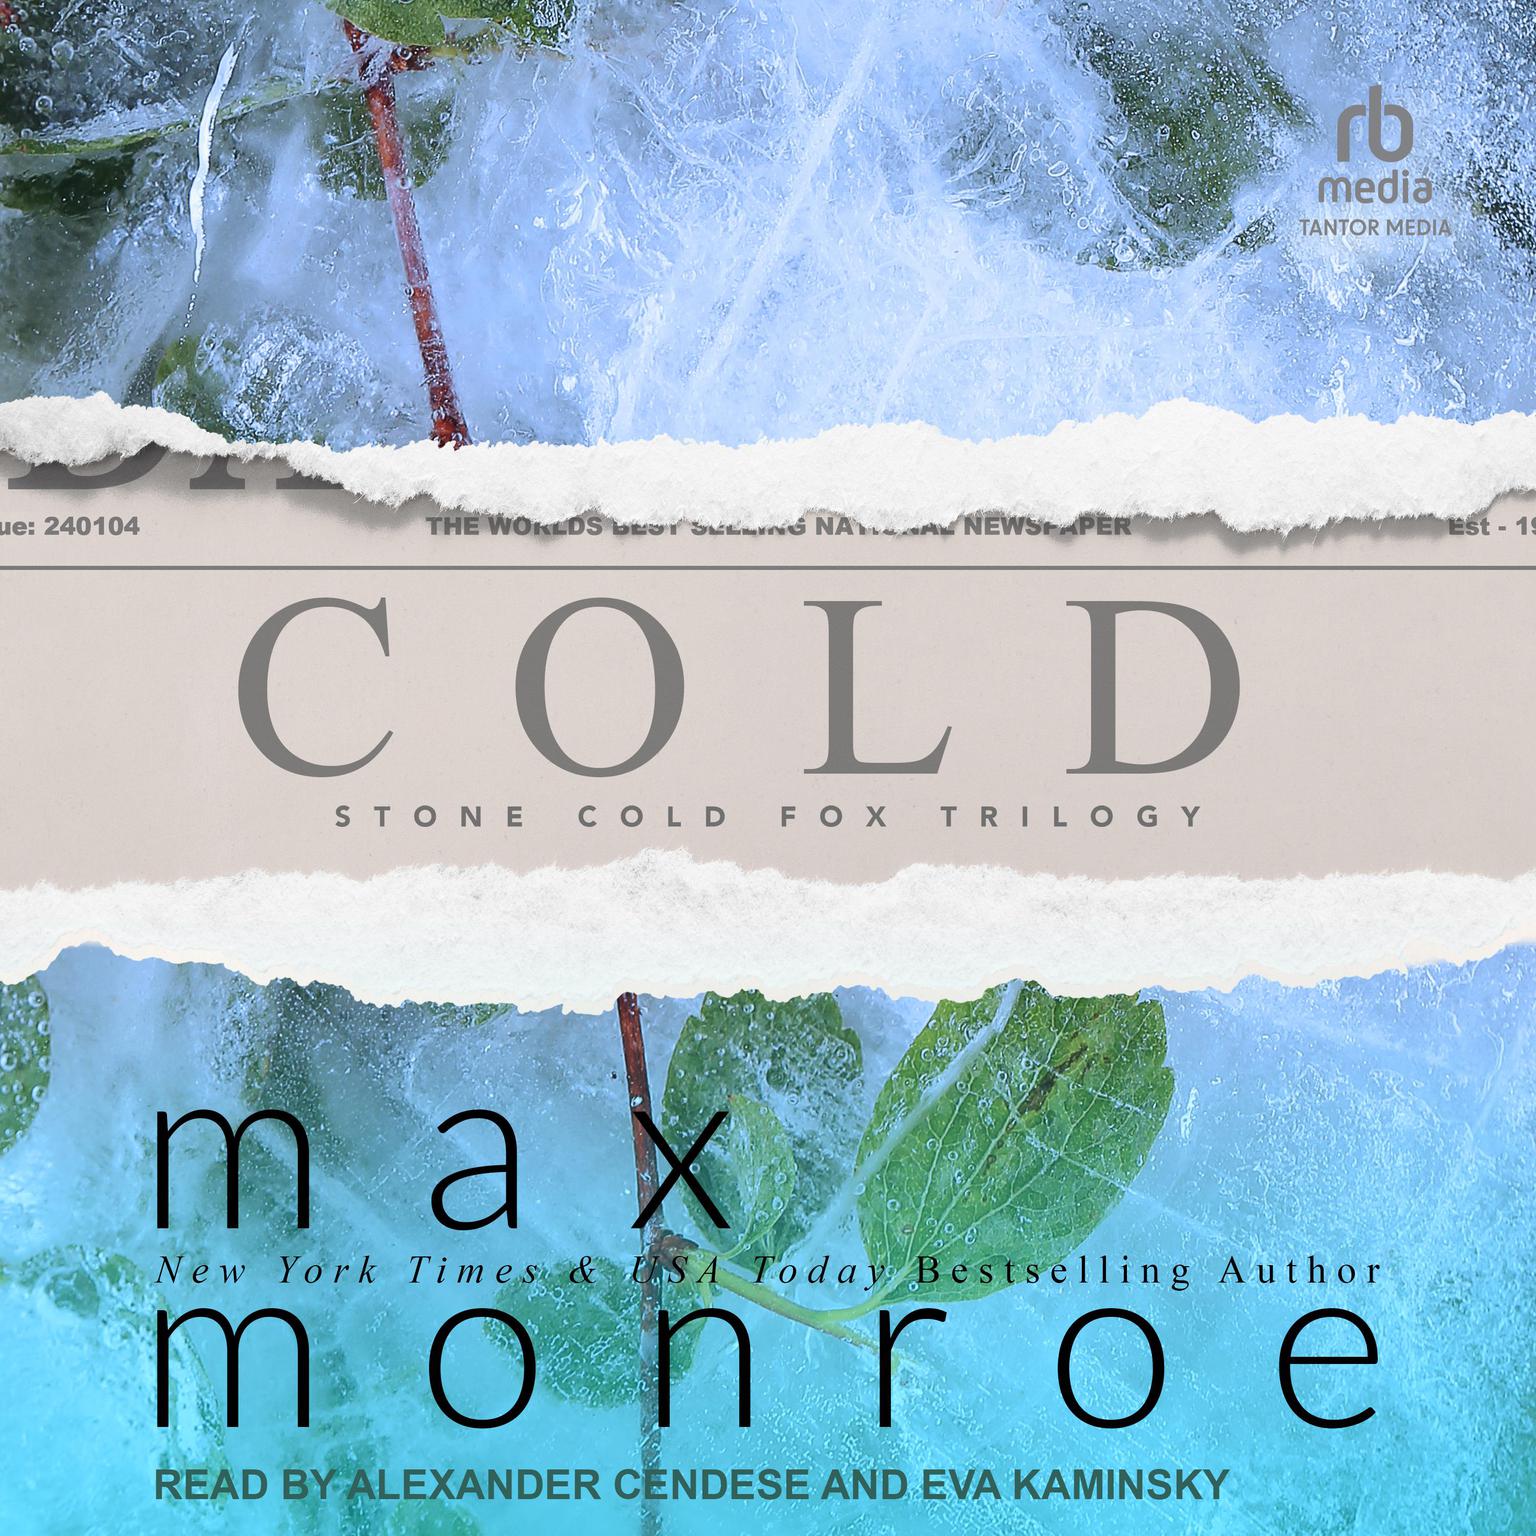 Cold Audiobook, by Max Monroe